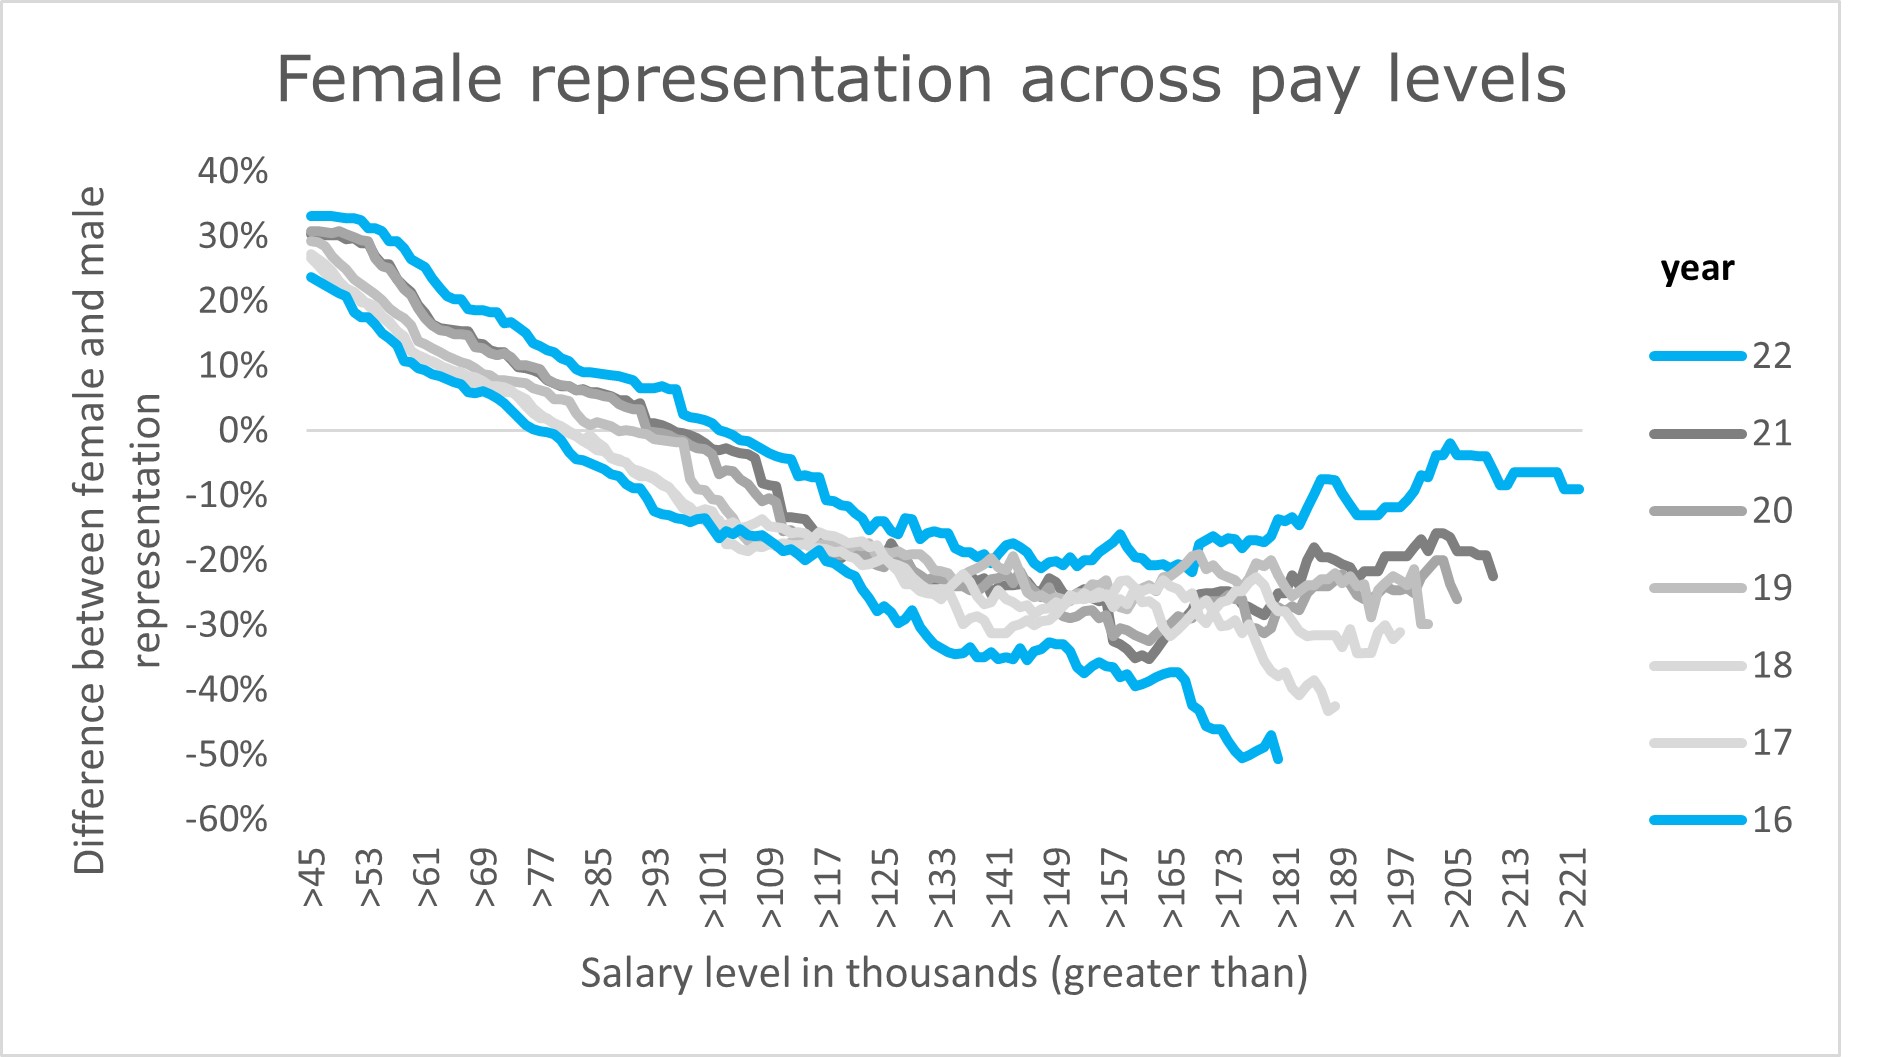 Line graph show female representation across pay levels. Salary level in thousands is on the horizontal axis. Difference between male and female representation is on the vertical axis.